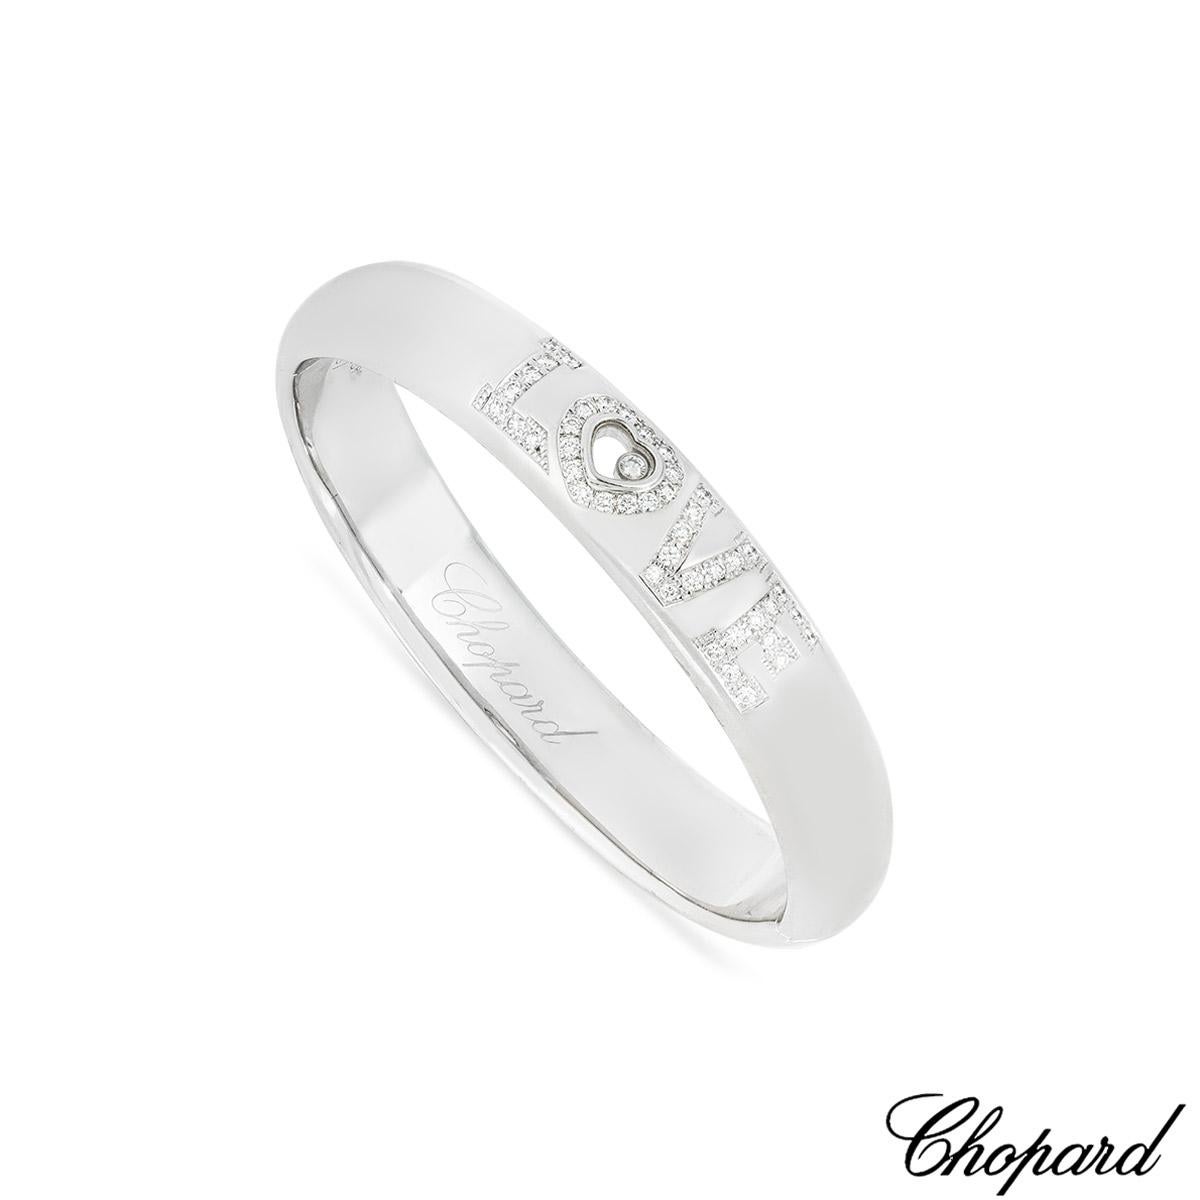 An iconic 18k white gold diamond bracelet from Chopard from the Happy Diamonds collection. The bracelet features the word 'Love' pave set with 43 round brilliant cut diamonds with an approximate total weight of 0.86ct, F-G colour and VS clarity. The